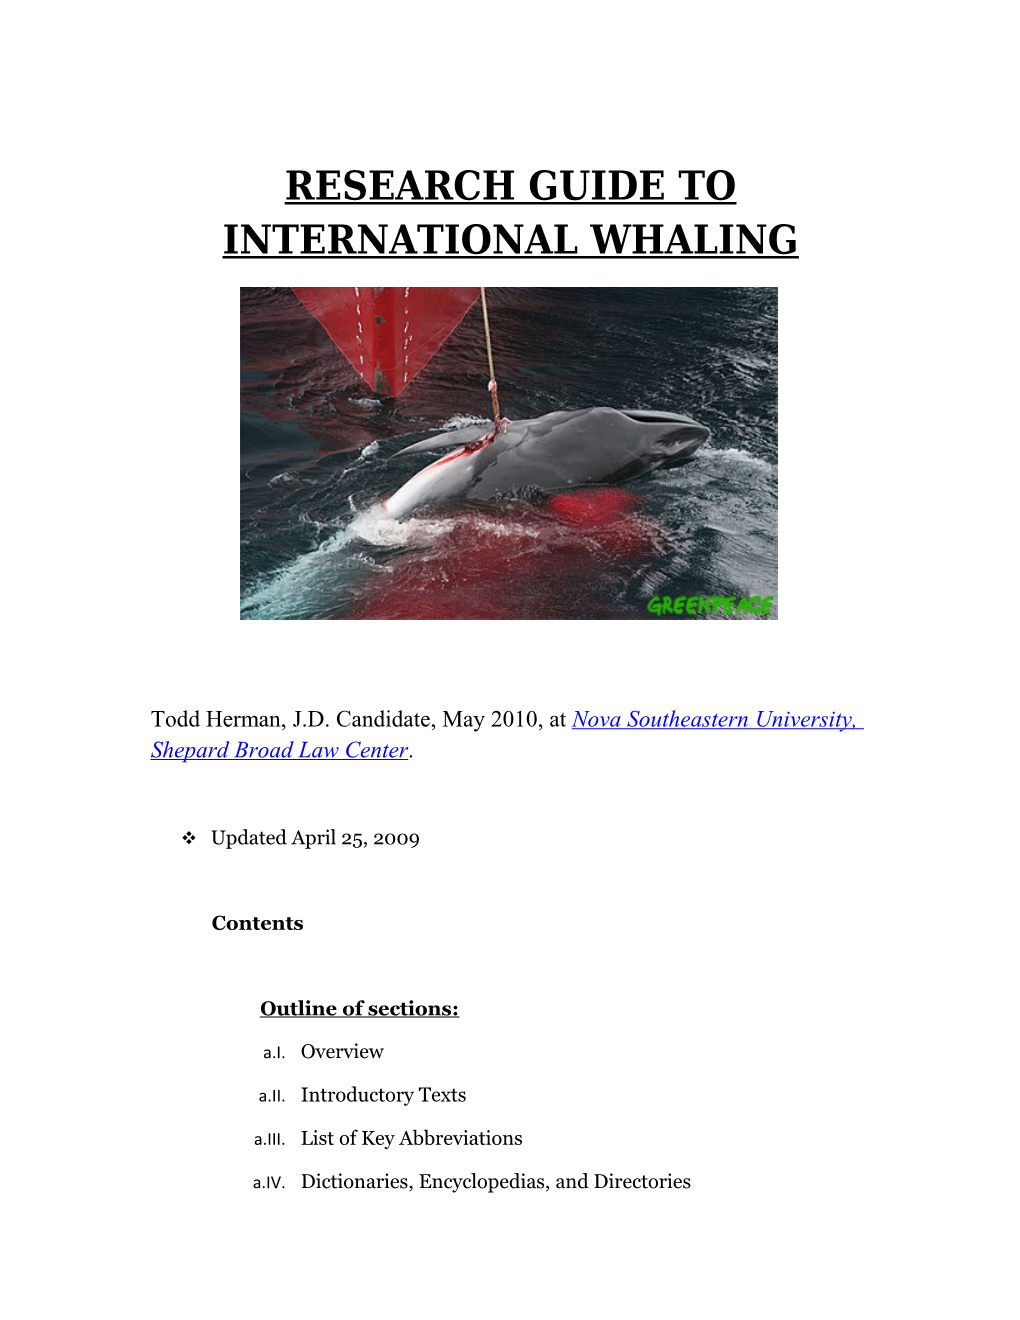 Research Guide to International Whaling